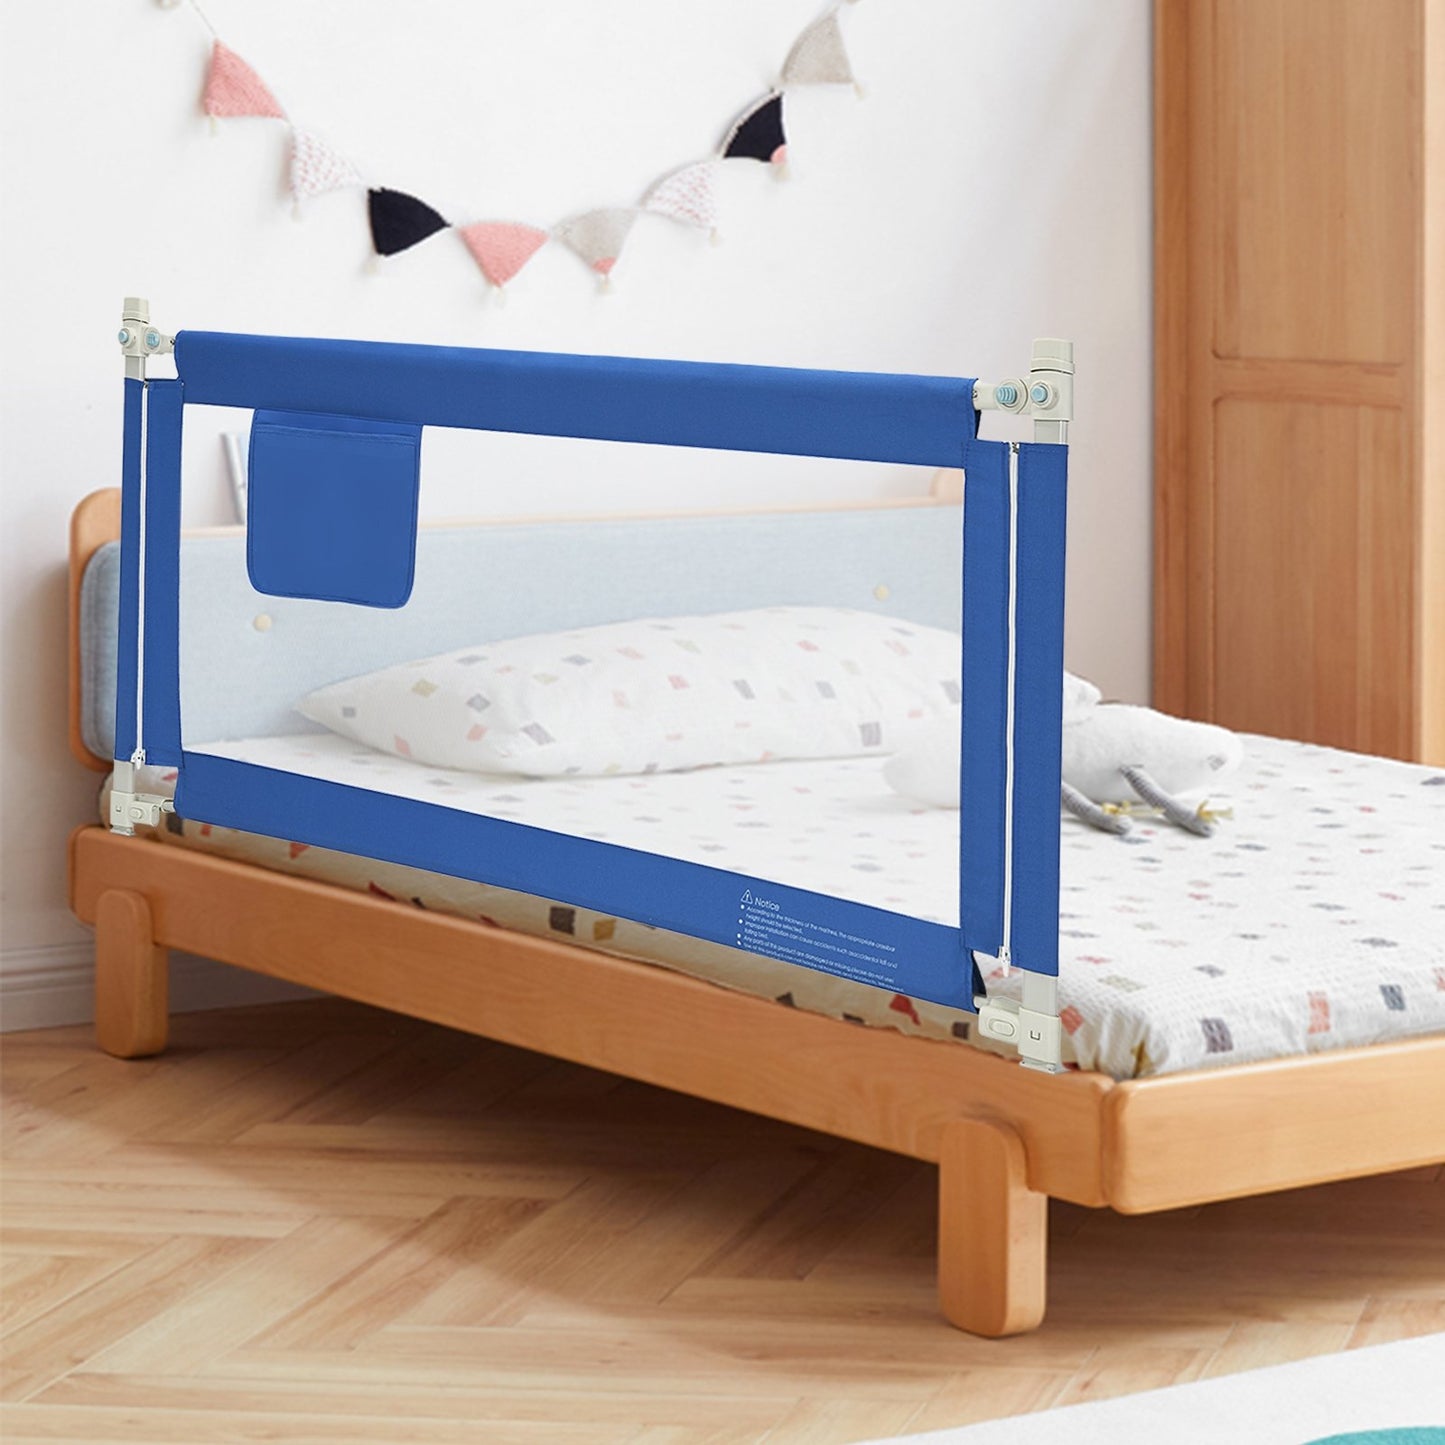 57 Inch Toddlers Vertical Lifting Baby Bed Rail Guard with Lock, Blue Bed Rails   at Gallery Canada